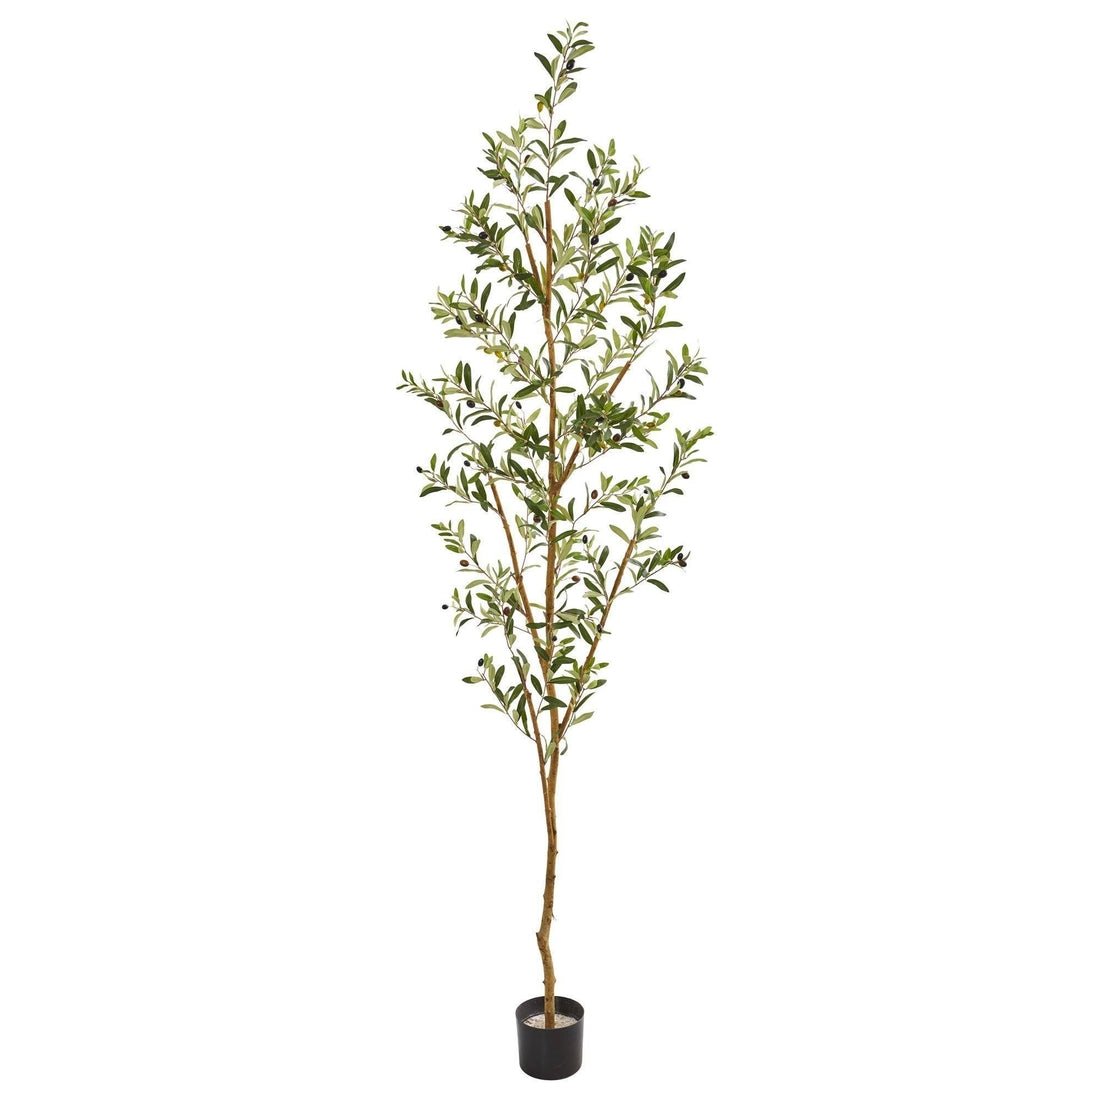 82” Artificial Olive Tree - Image 1